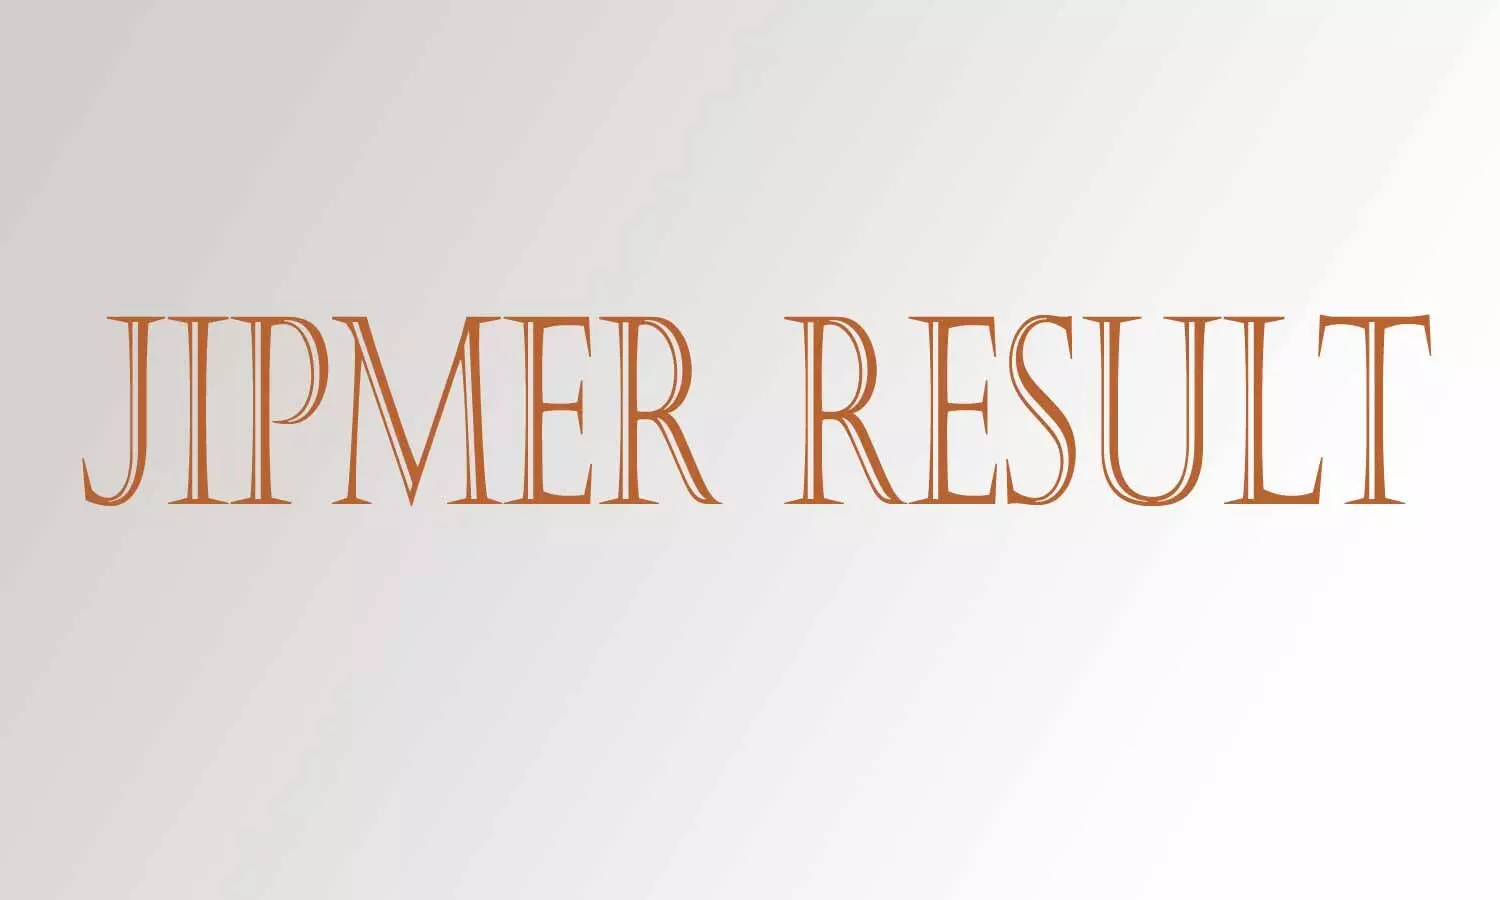 JIPMER releases results for Entrance Exam For BSc, MSc, MPH 2020